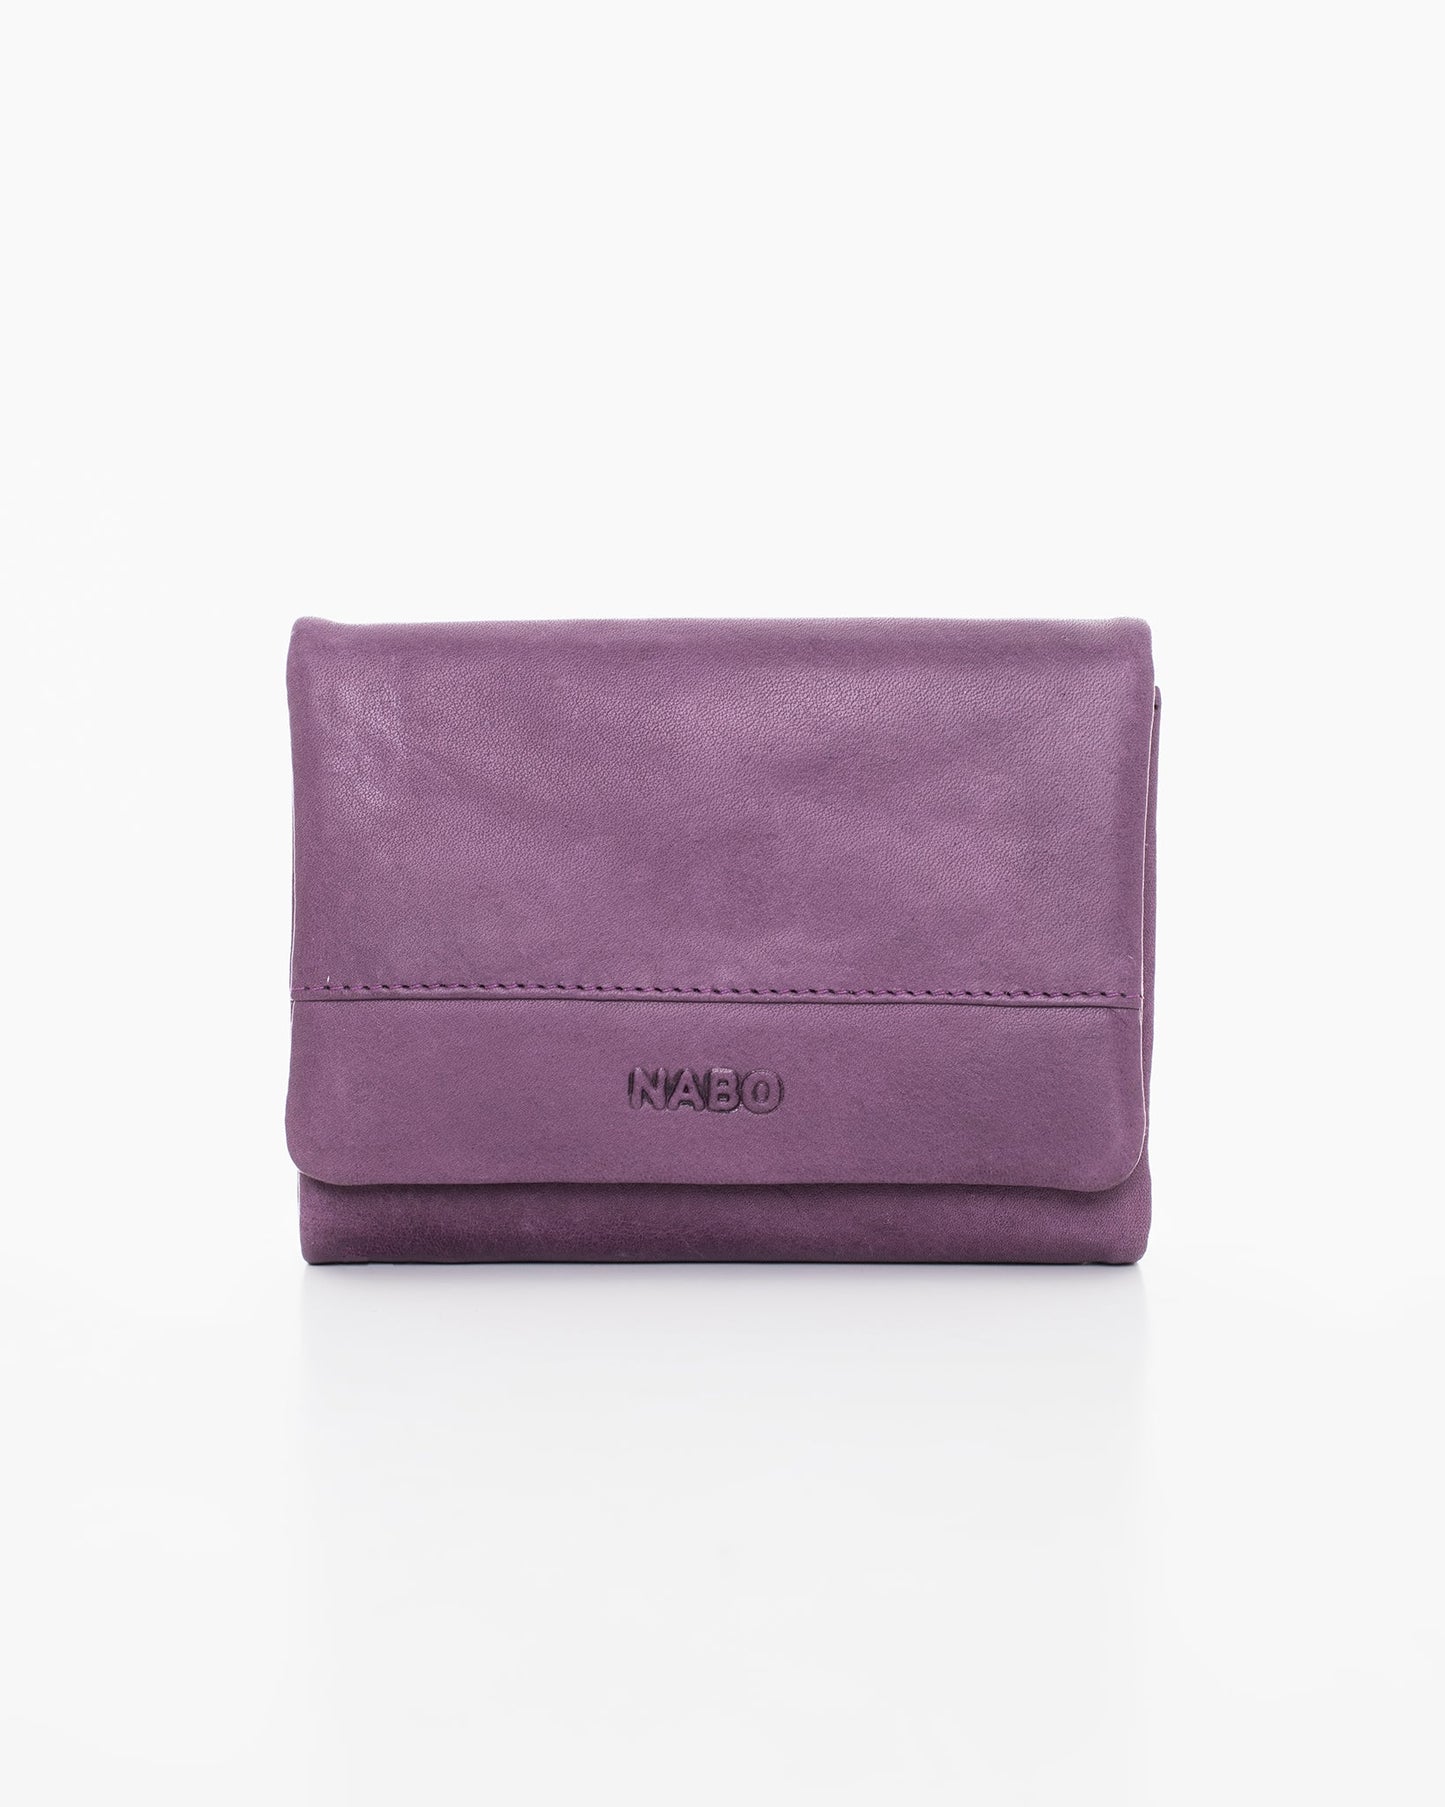 RFID-blocking Leather Wallet in Purple by Nabo. Genuine leather with 12 card slots, bill compartments, coin pocket, and driving license slot. Snap button closure. Dimensions: 12 x 9 x 2.5 cm.